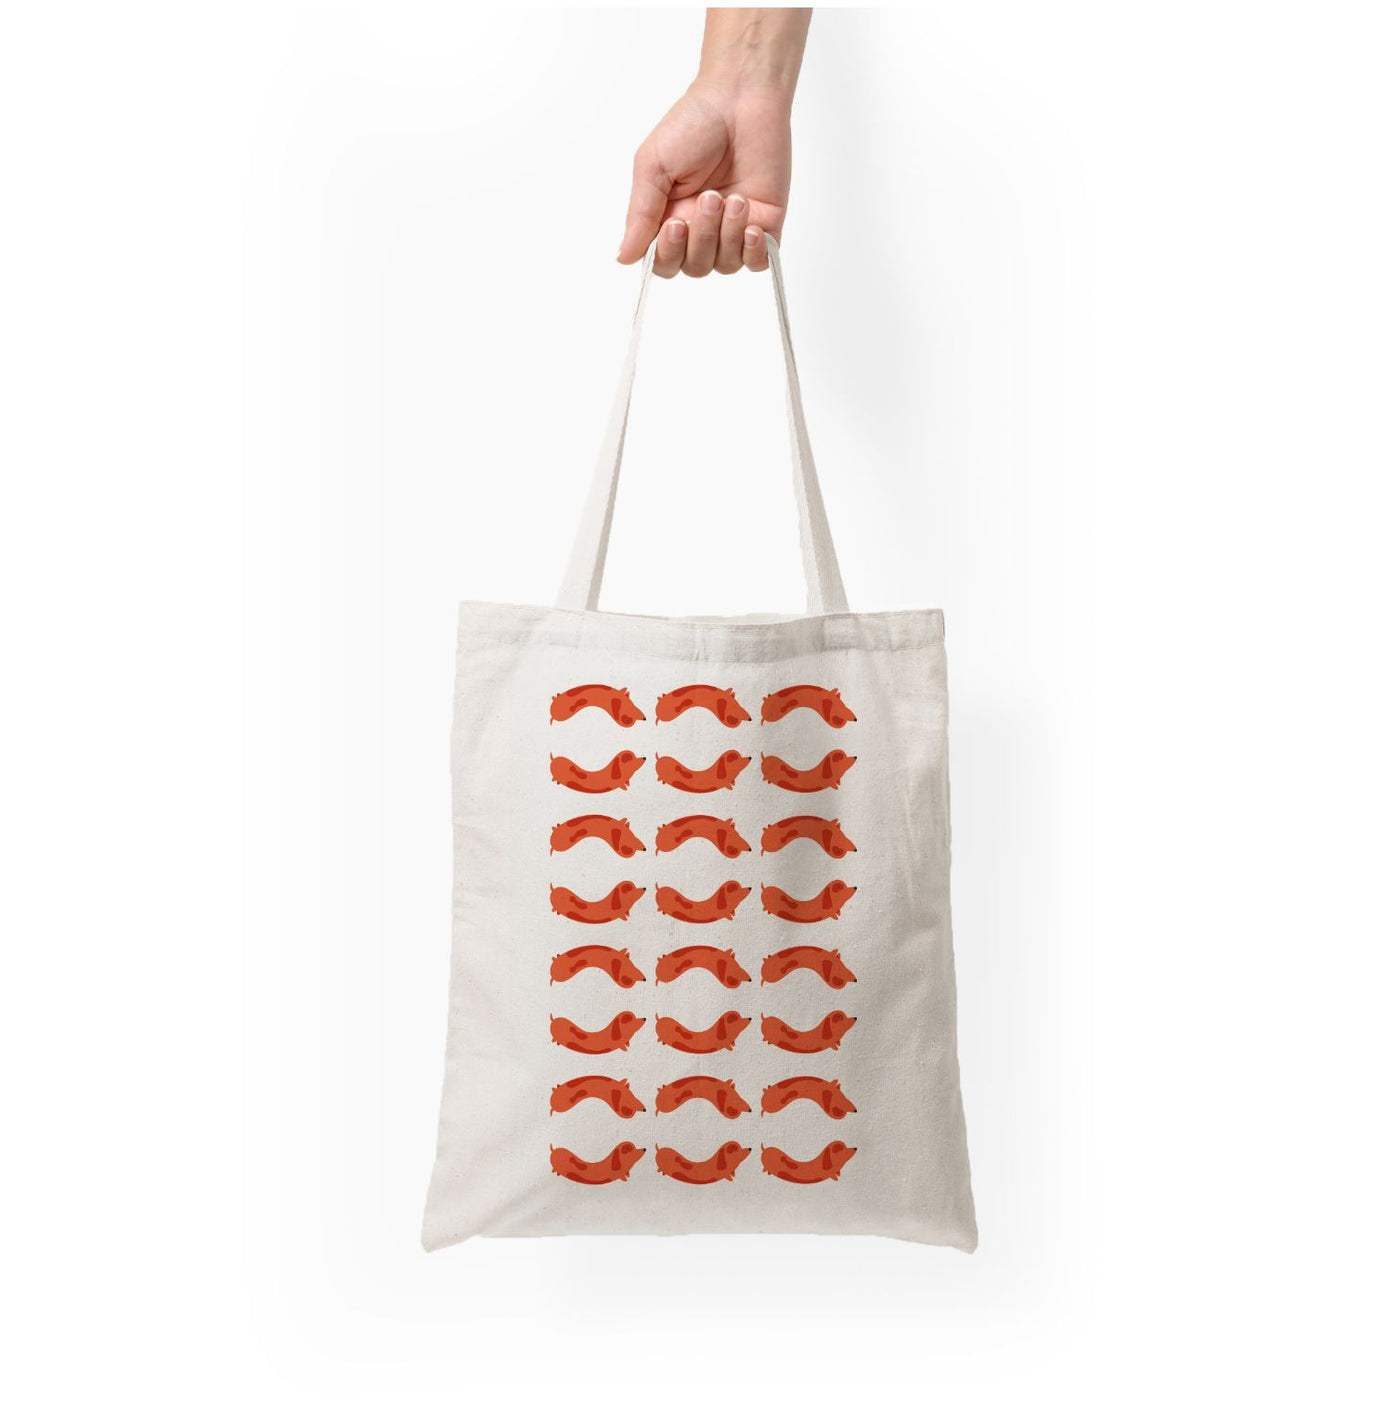 Dachshunds Pattern Tote Bag